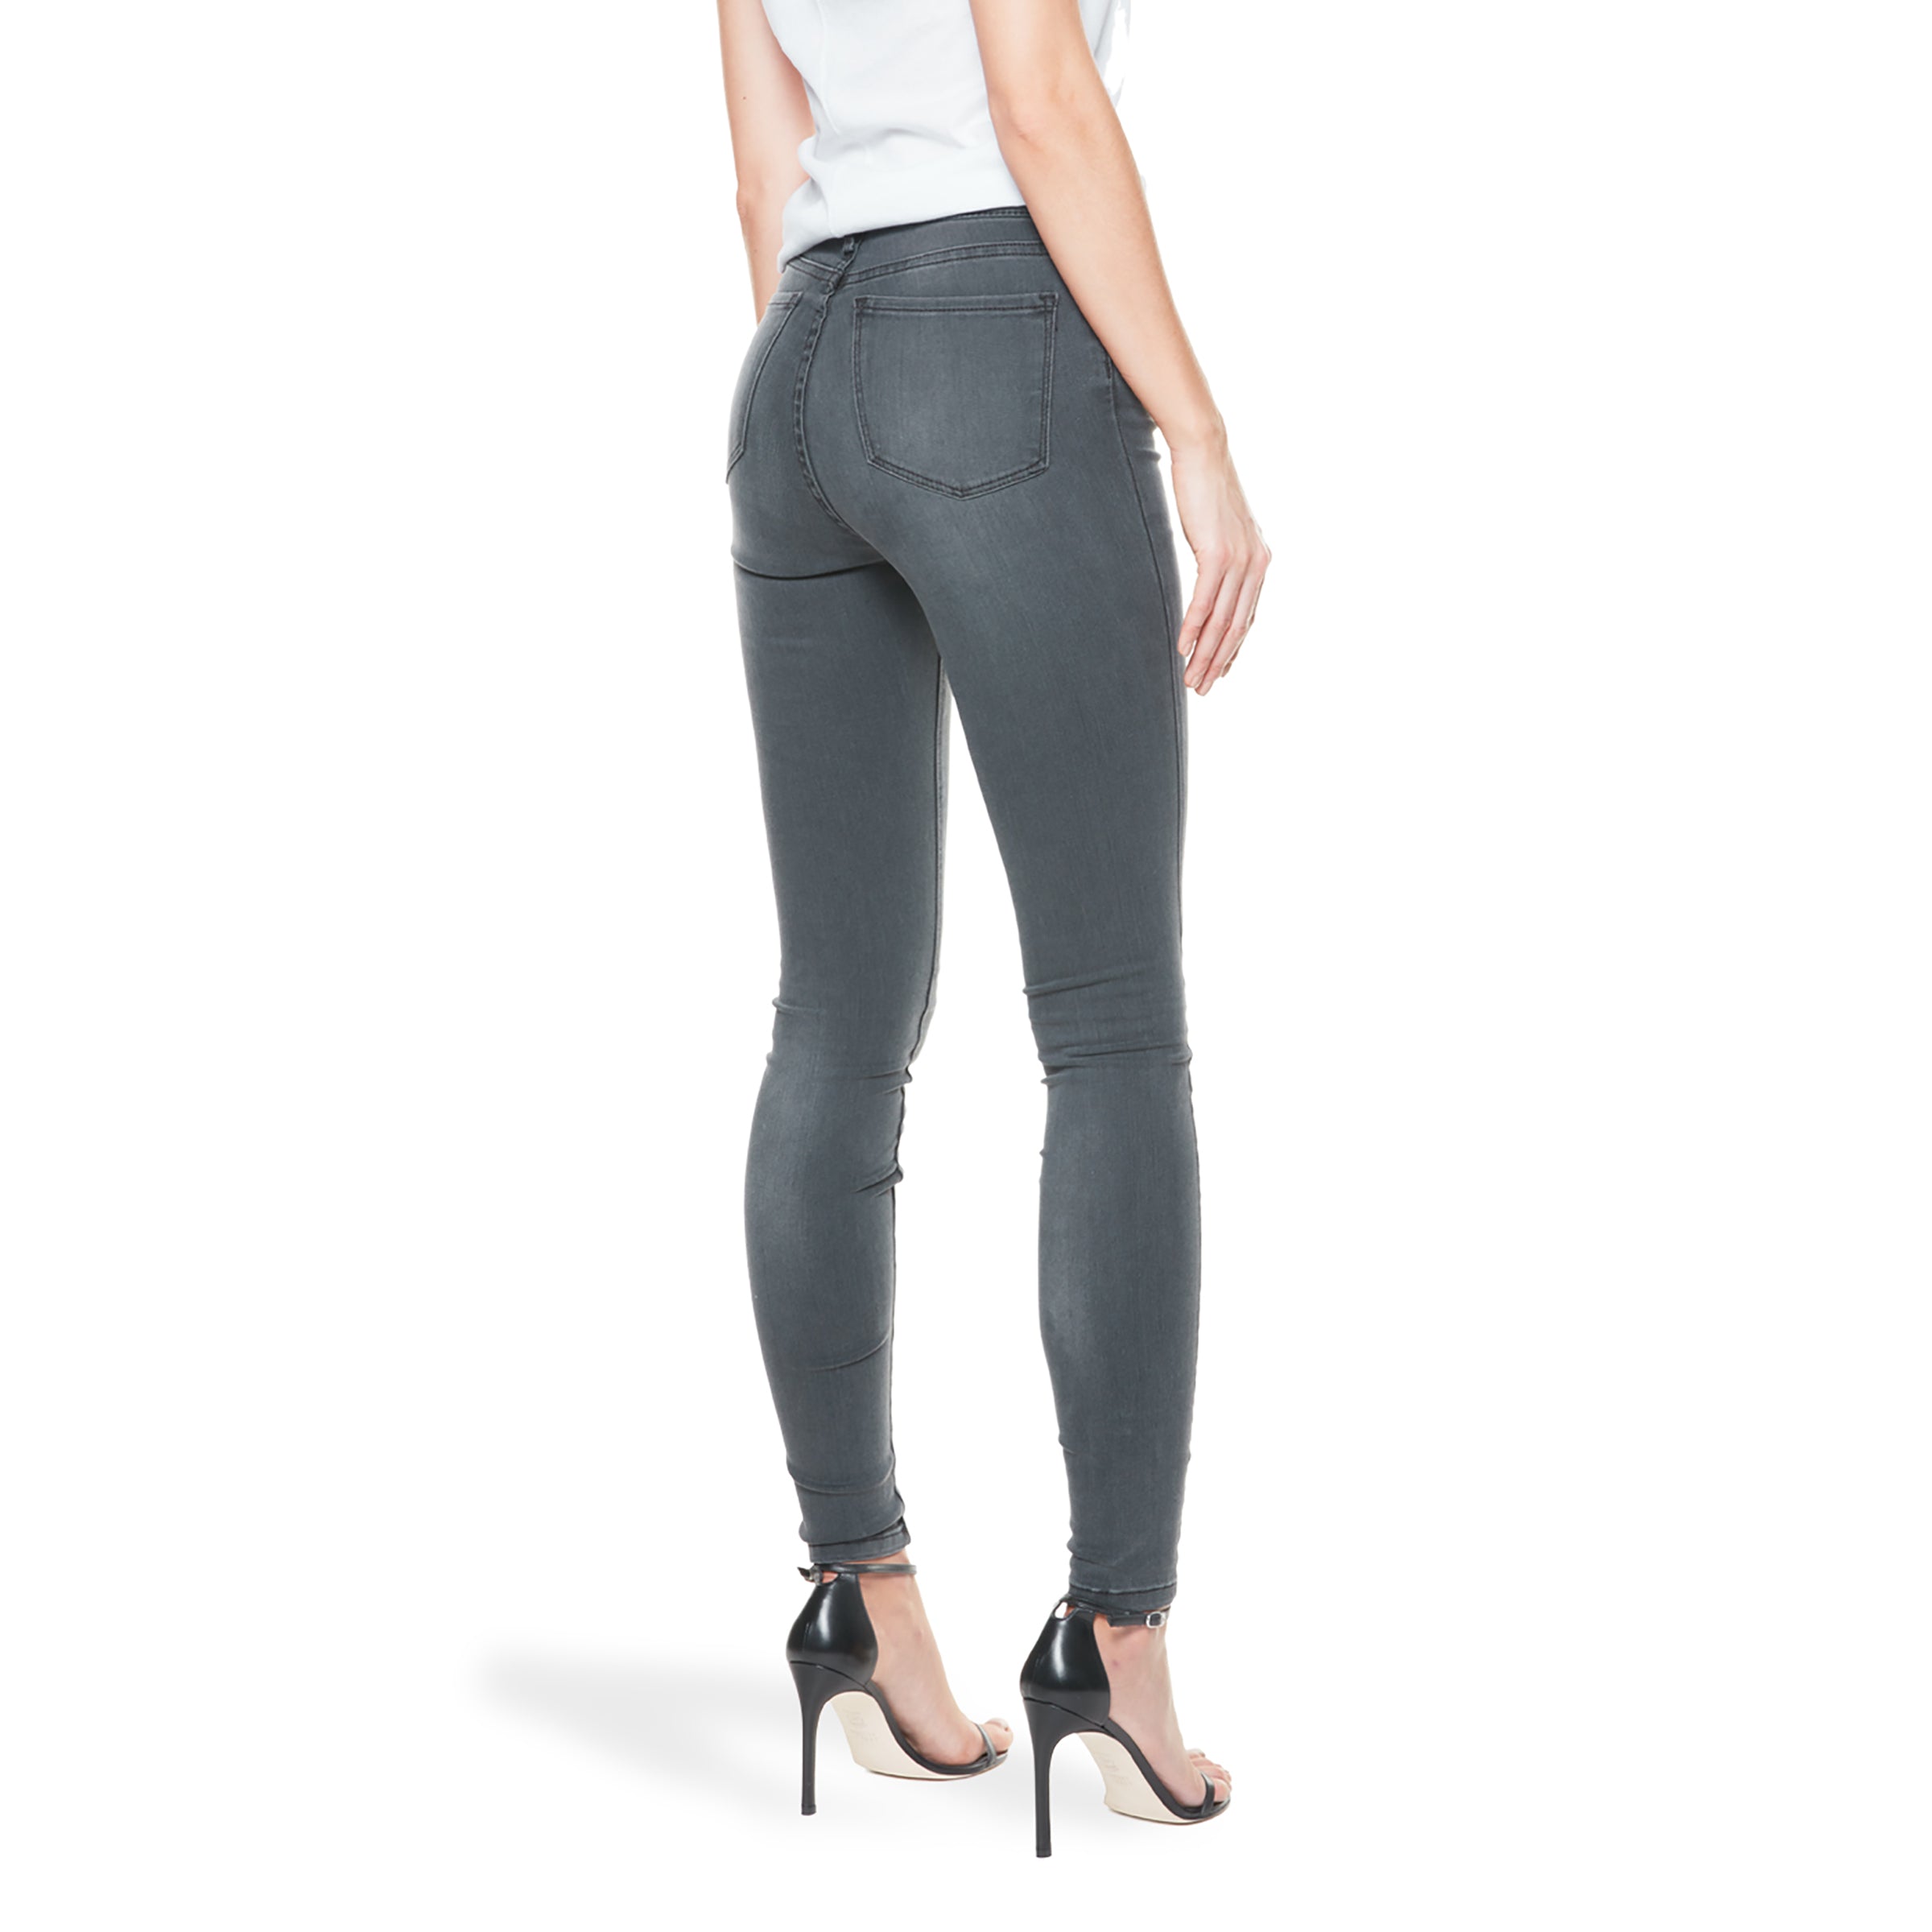 Women wearing Gris medio High Rise Skinny Orchard Jeans